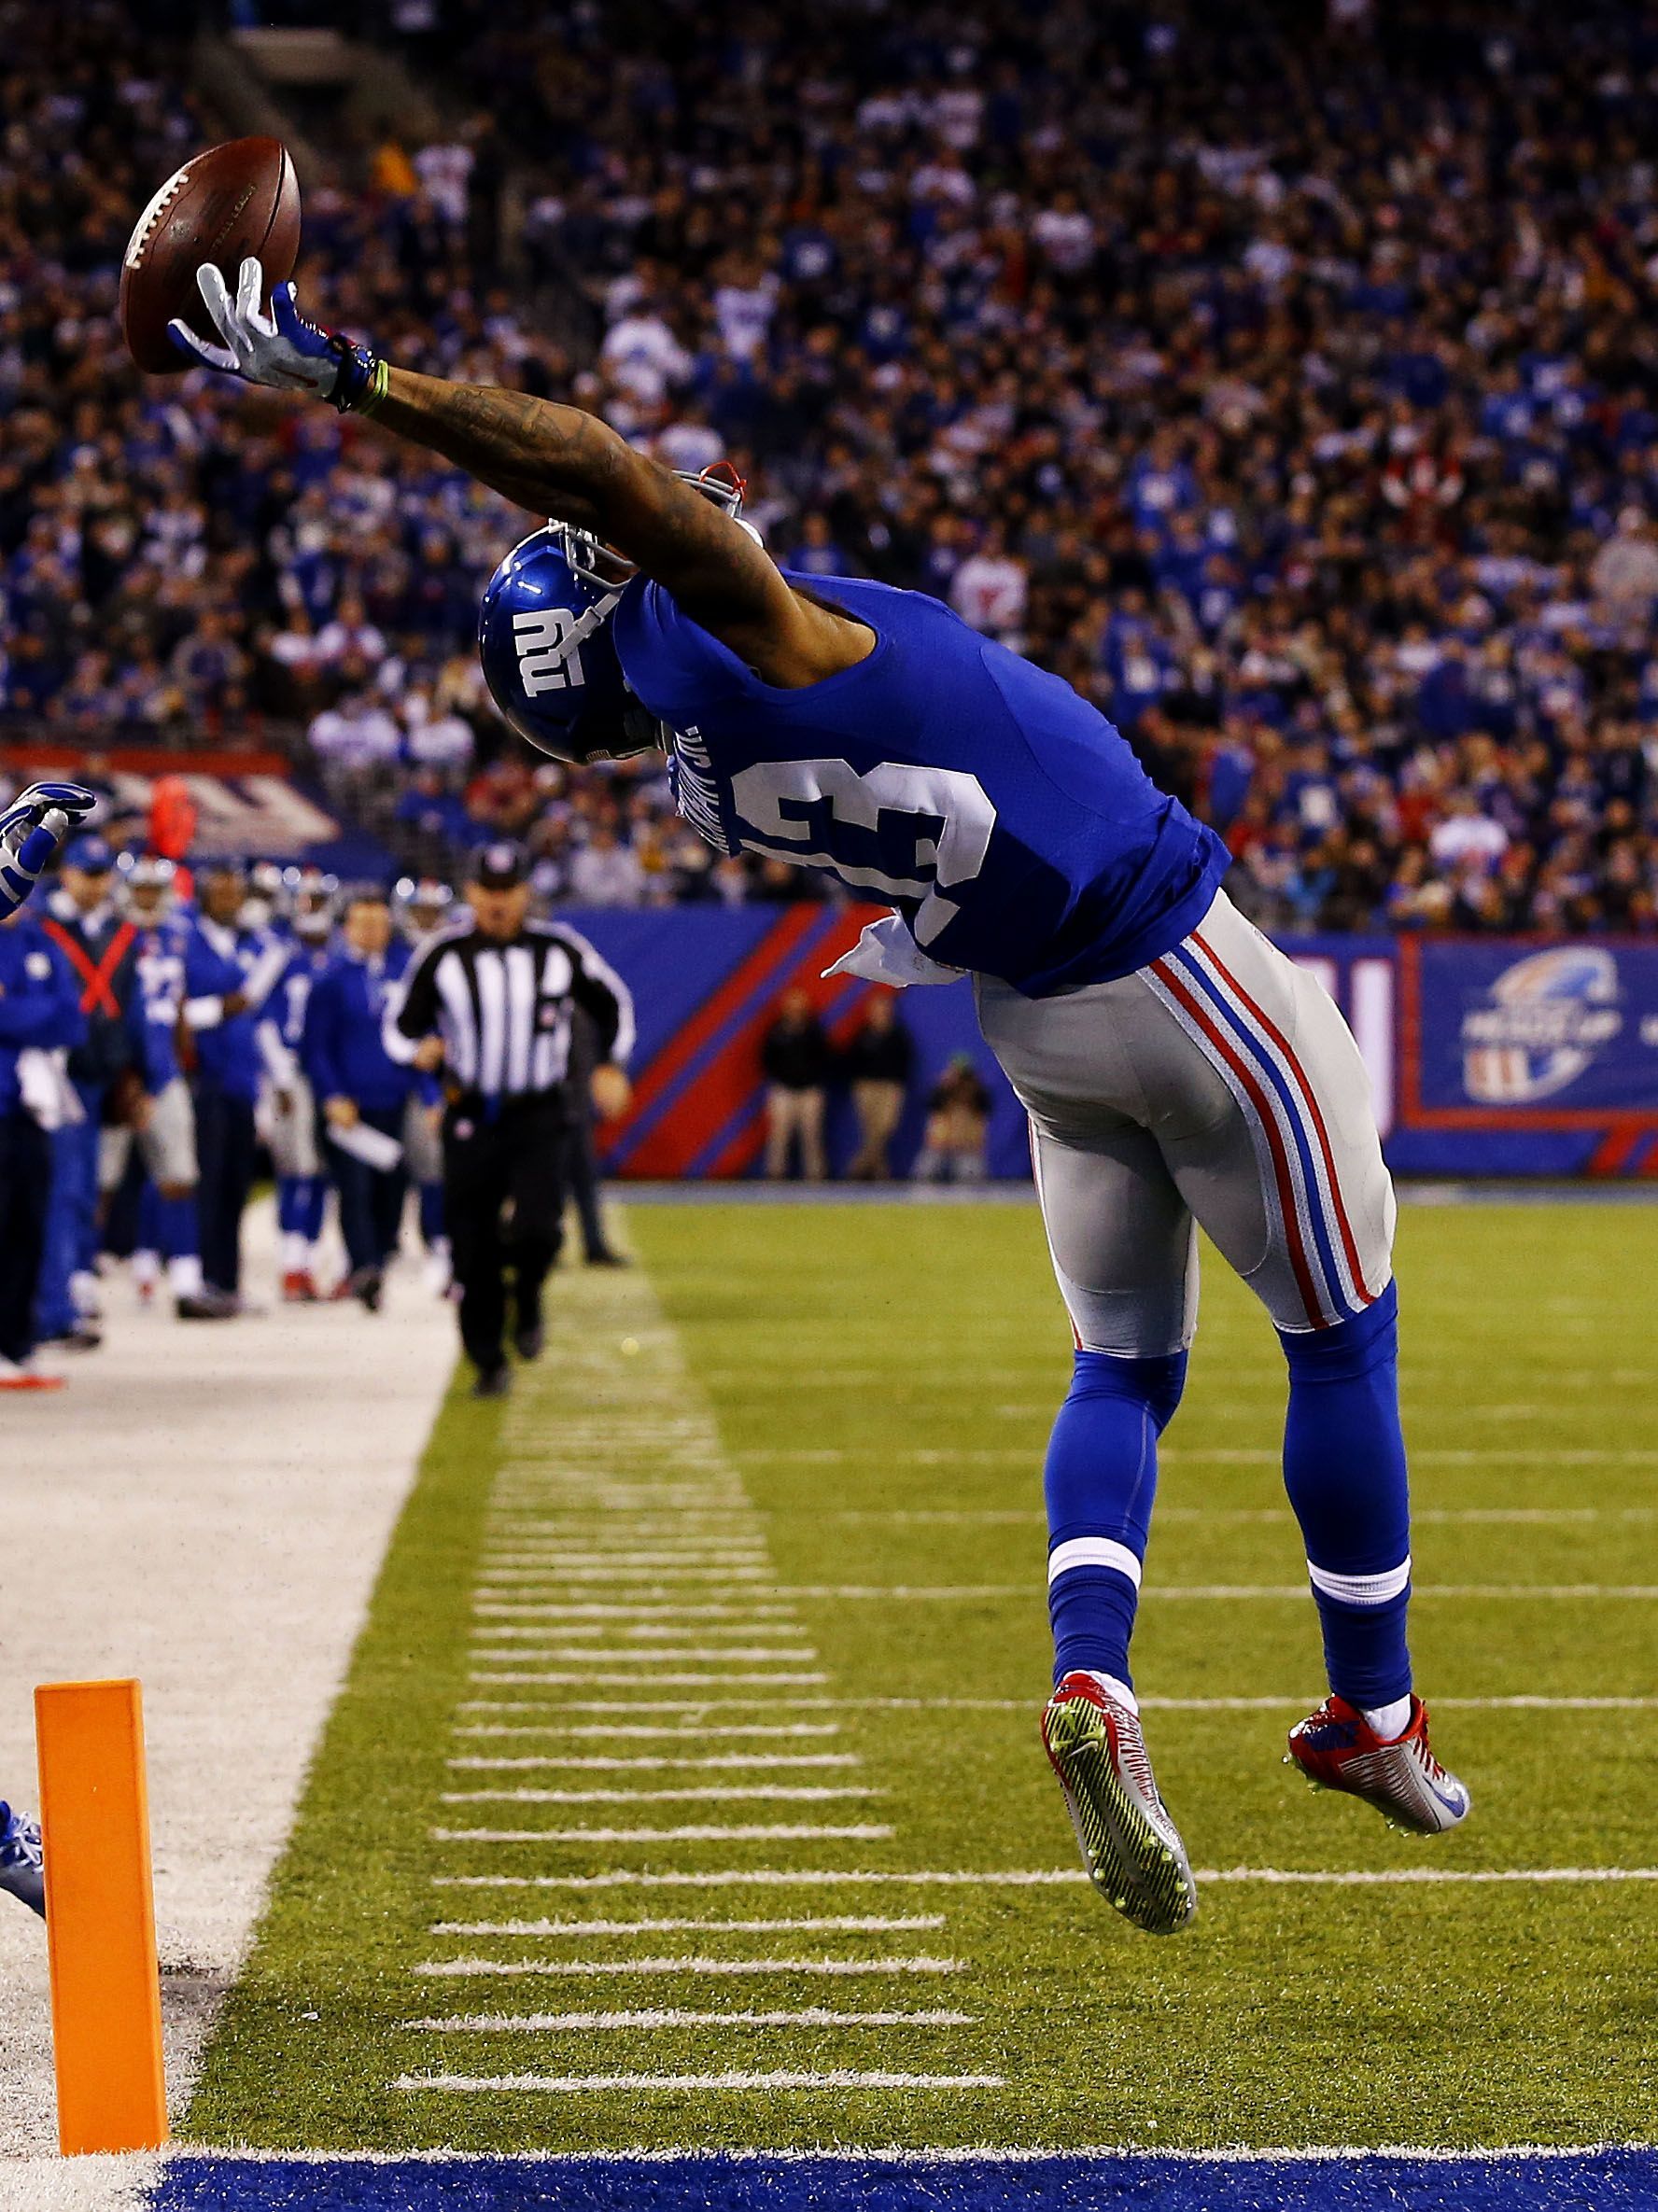 If you haven&;t seen Odell Beckham Jr.&;s insane catch by now, watch it here, but also check out these photo fro. Beckham jr, Odell beckham jr, Nfl history